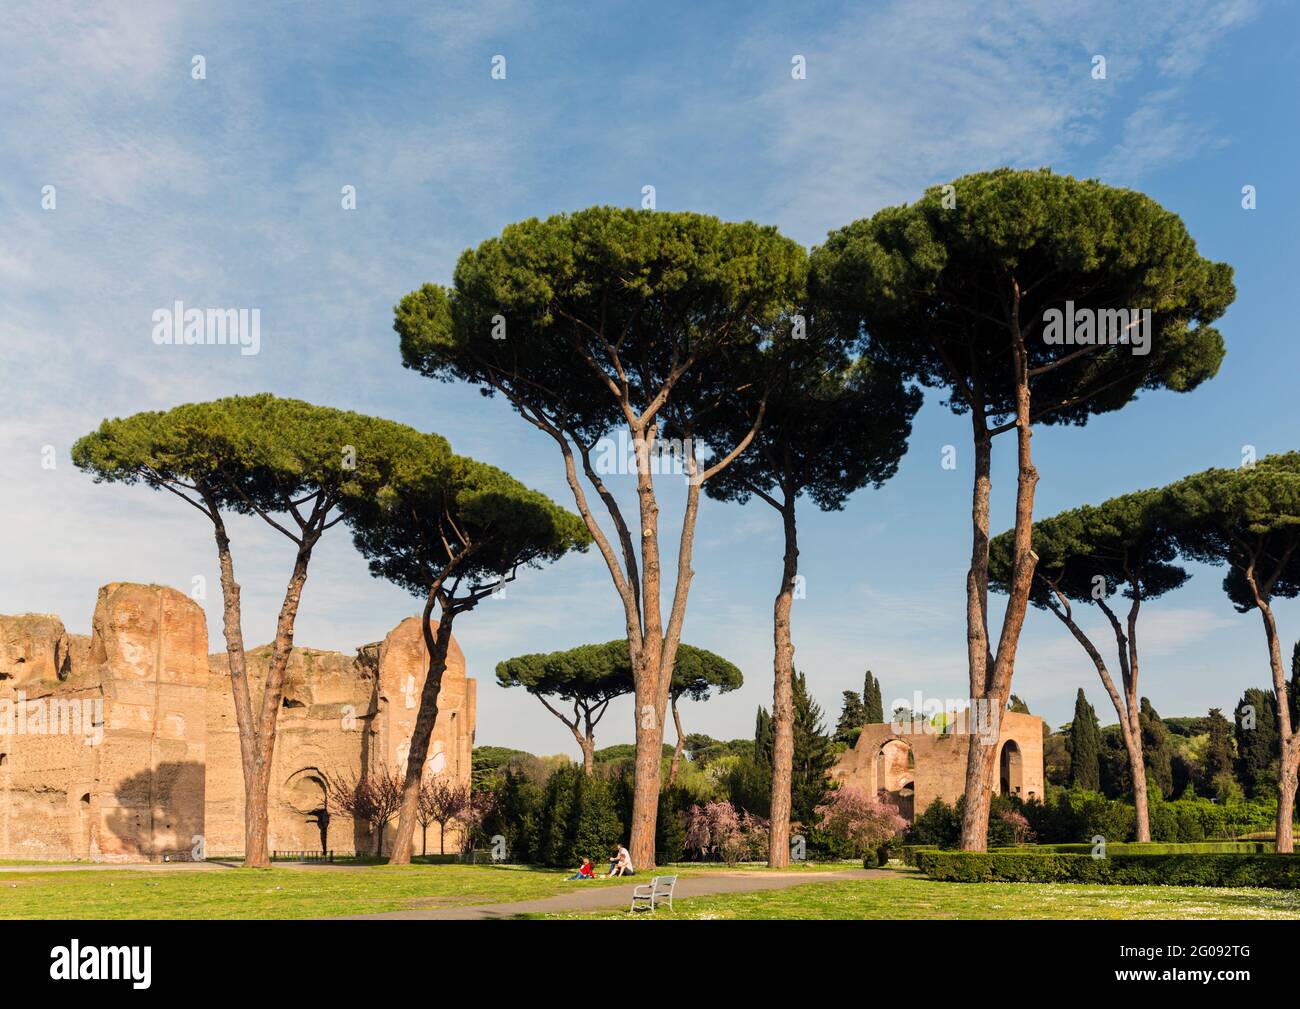 Rome, Italy.  Terme di Caracalla, or Baths of Caracalla dating from the 3rd century AD.  The historic centre of Rome is a UNESCO World Heritage Site. Stock Photo